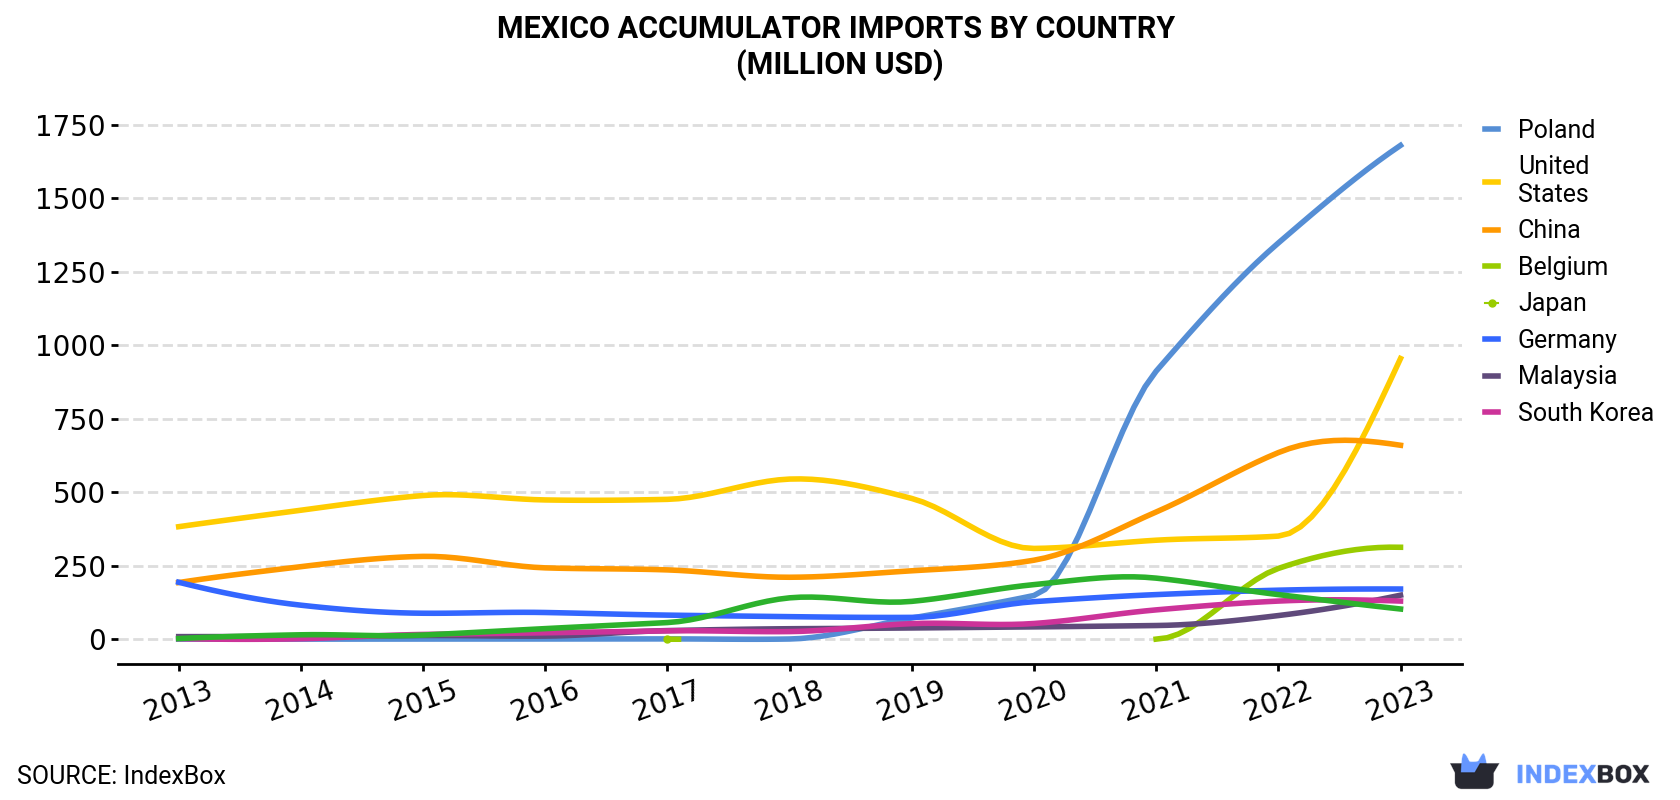 Mexico Accumulator Imports By Country (Million USD)